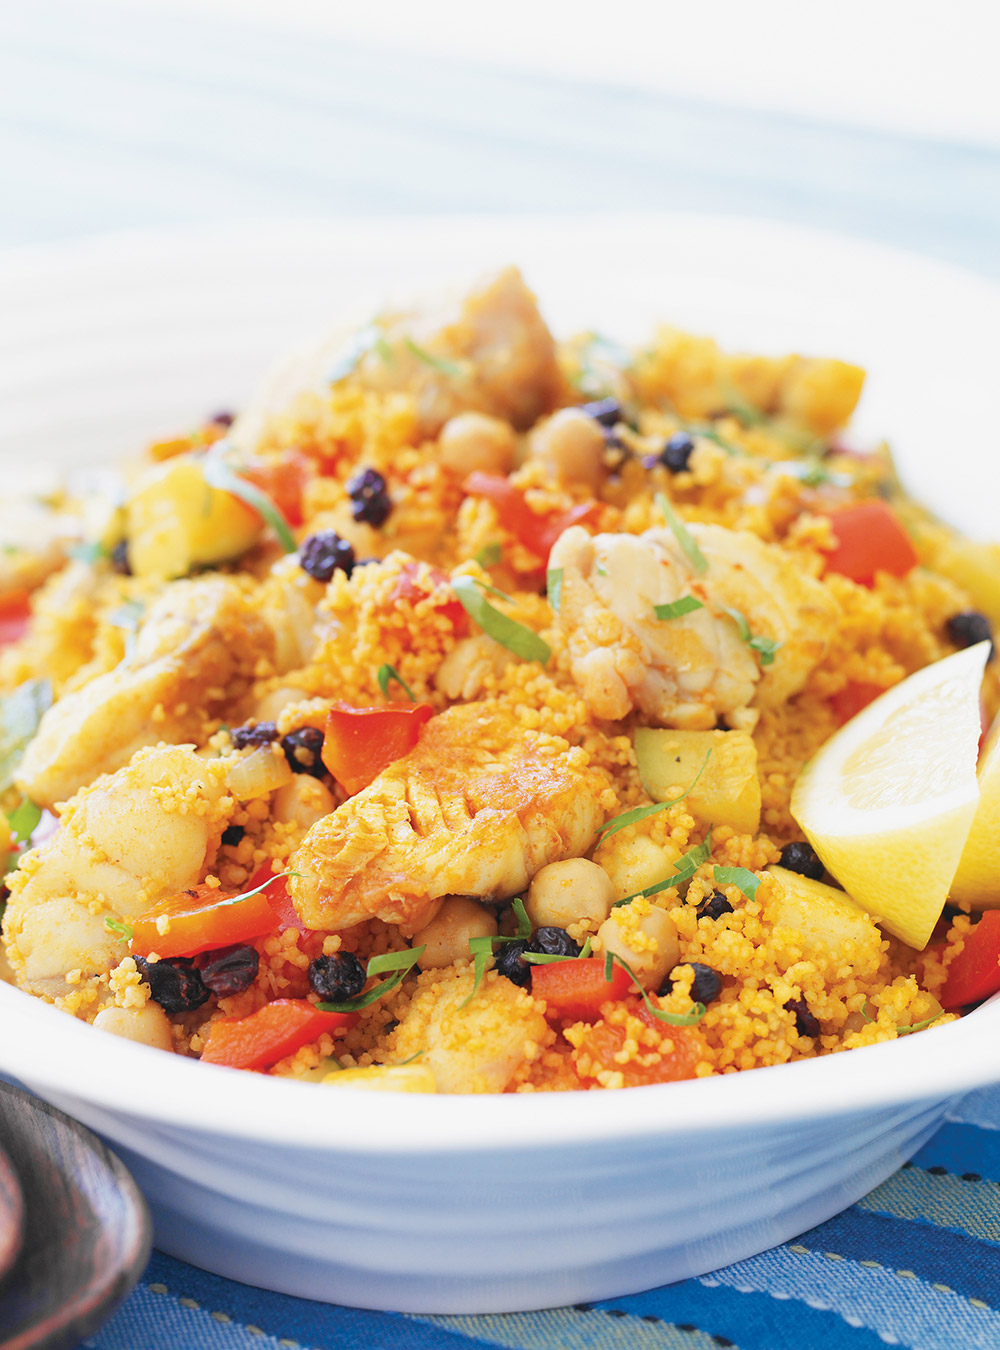 Tunisian-Style Couscous with Fish